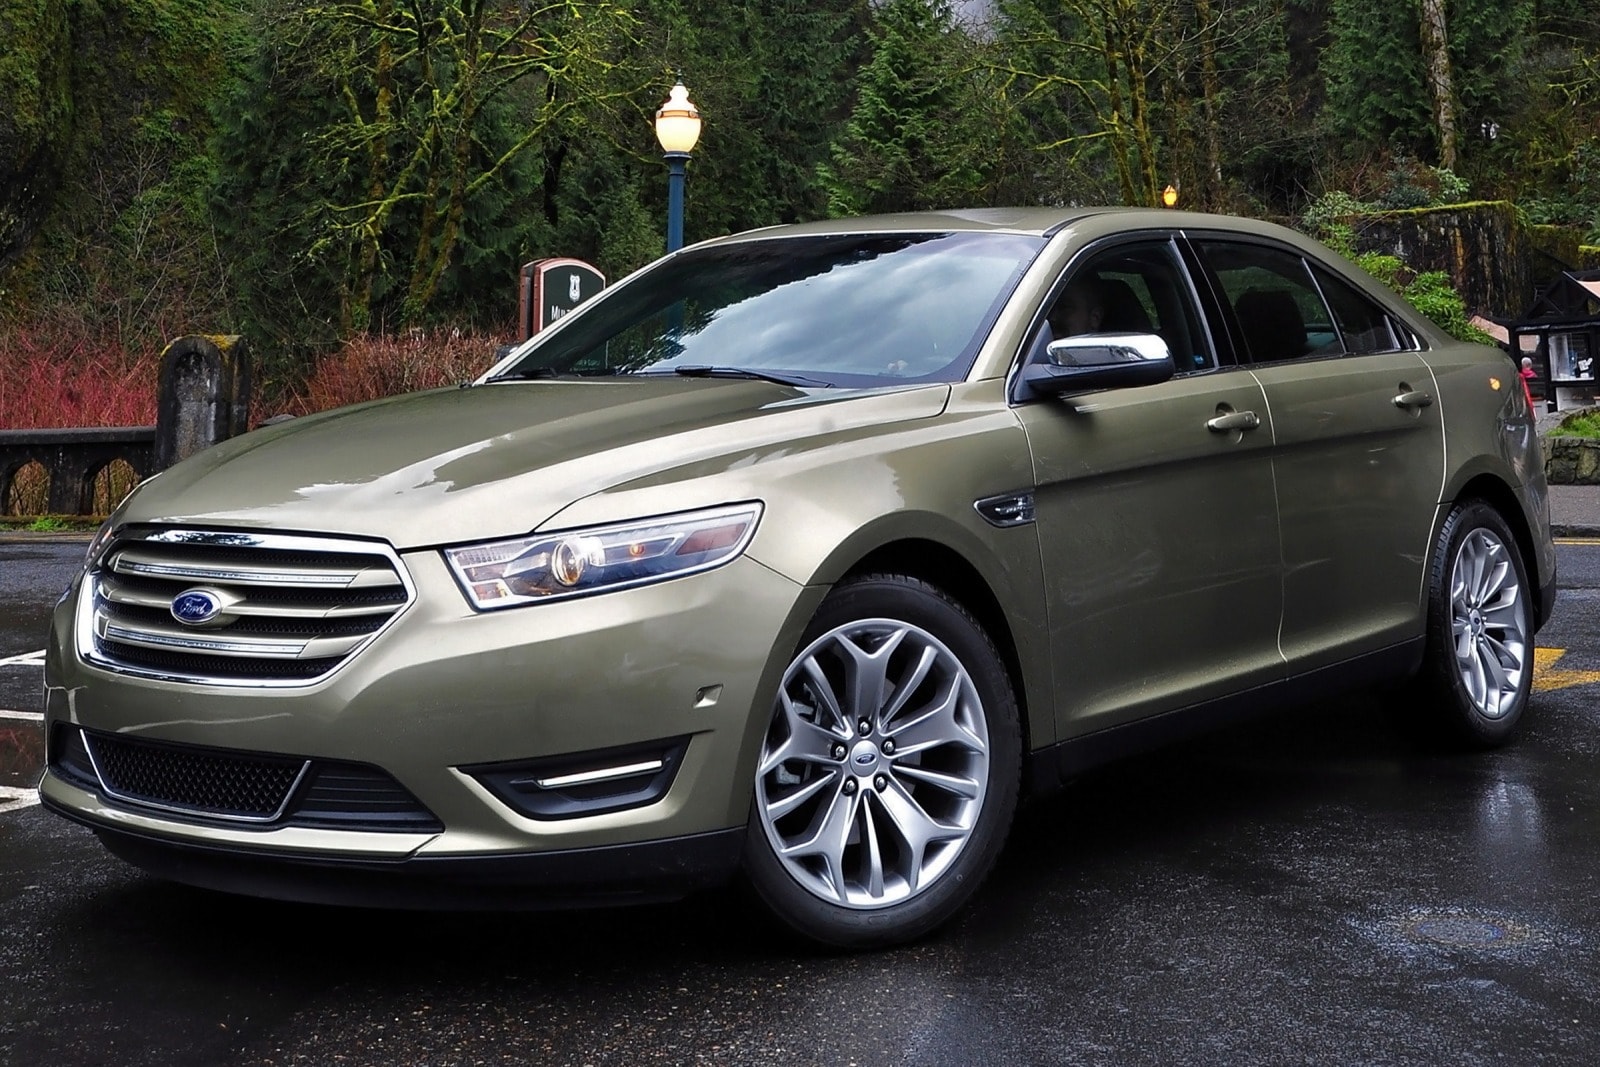 2014 Ford Taurus Review & Ratings | Edmunds